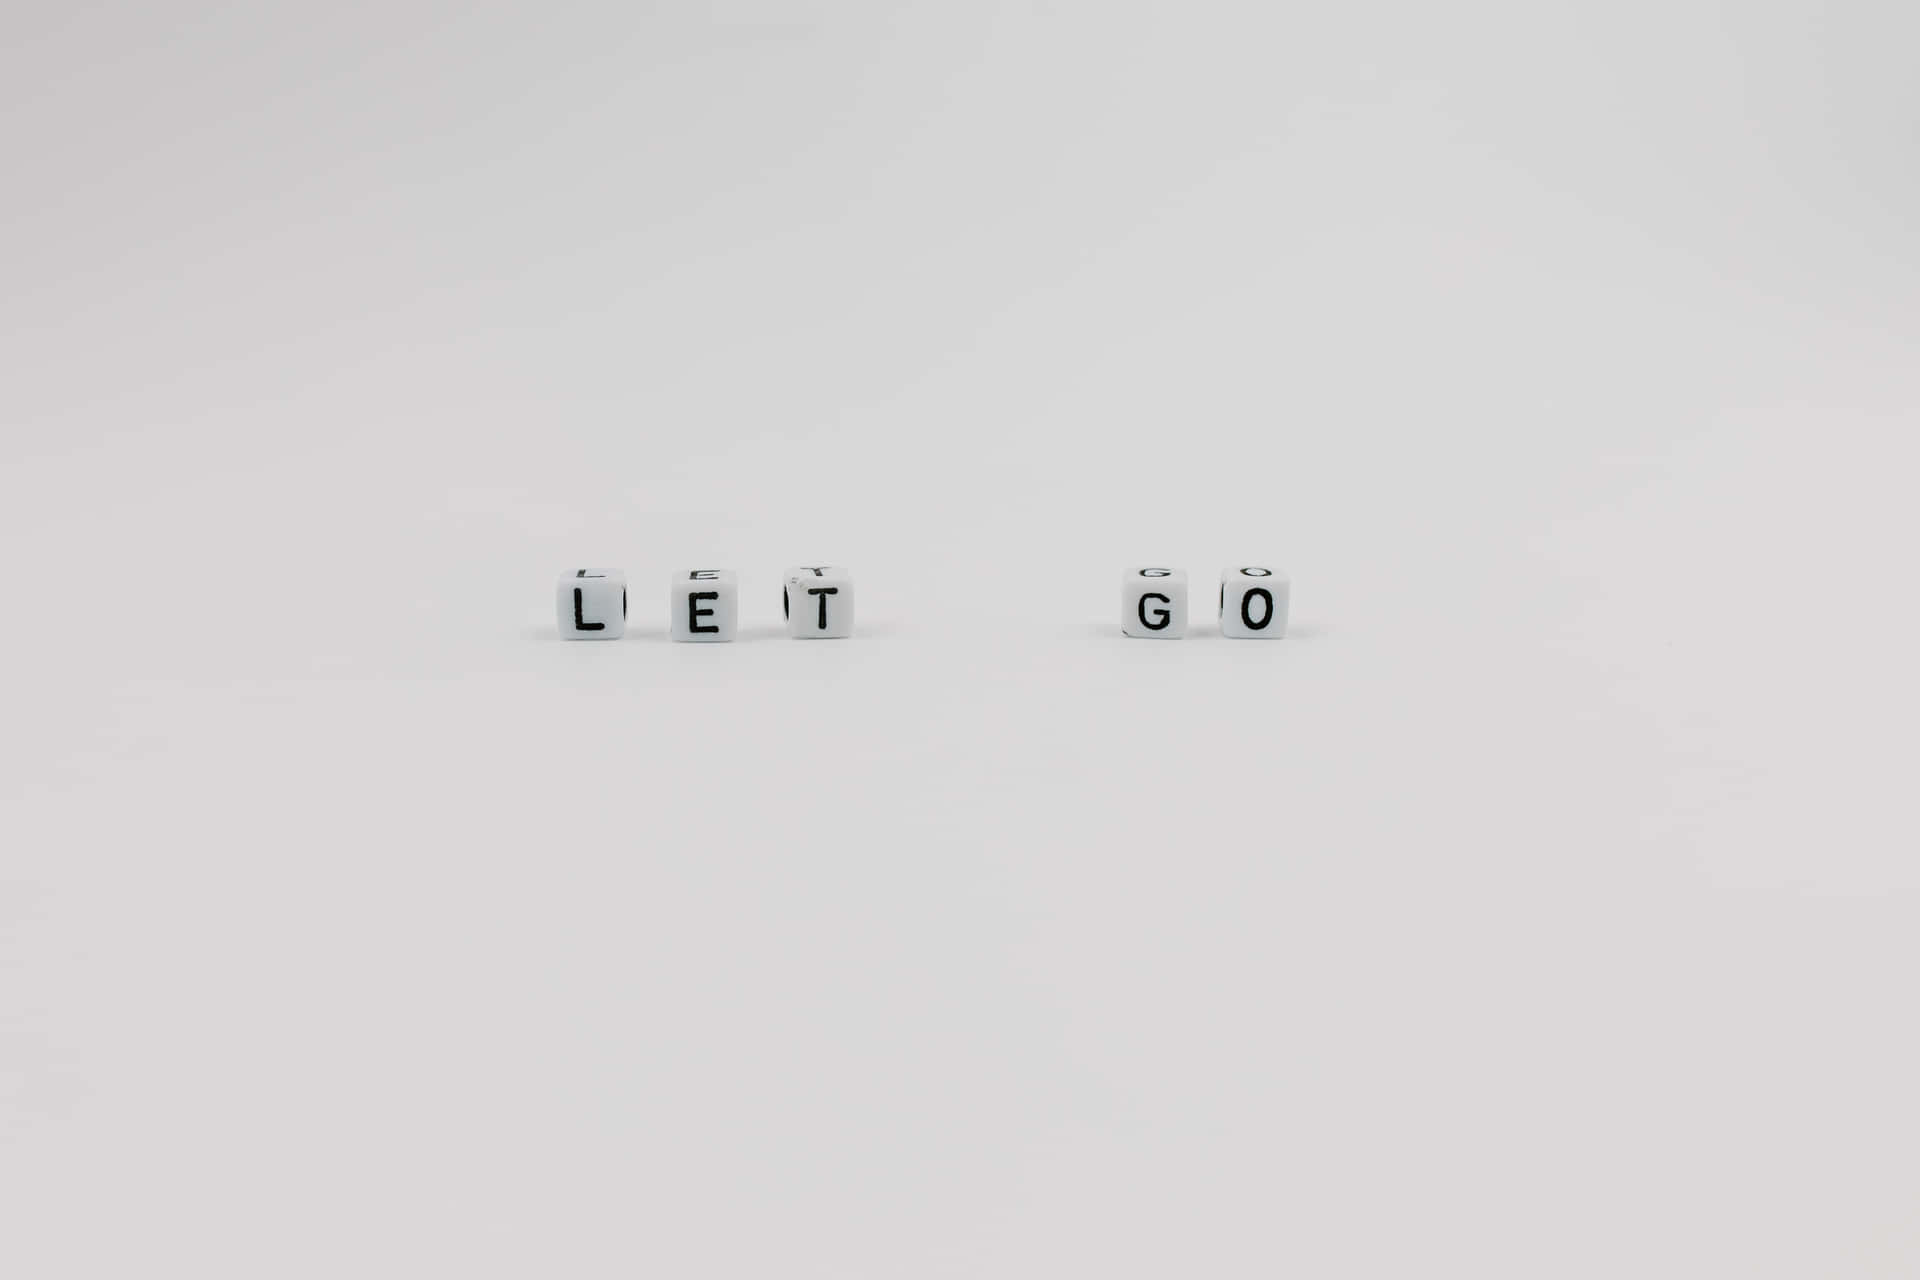 Let Go - A Black And White Photo Wallpaper